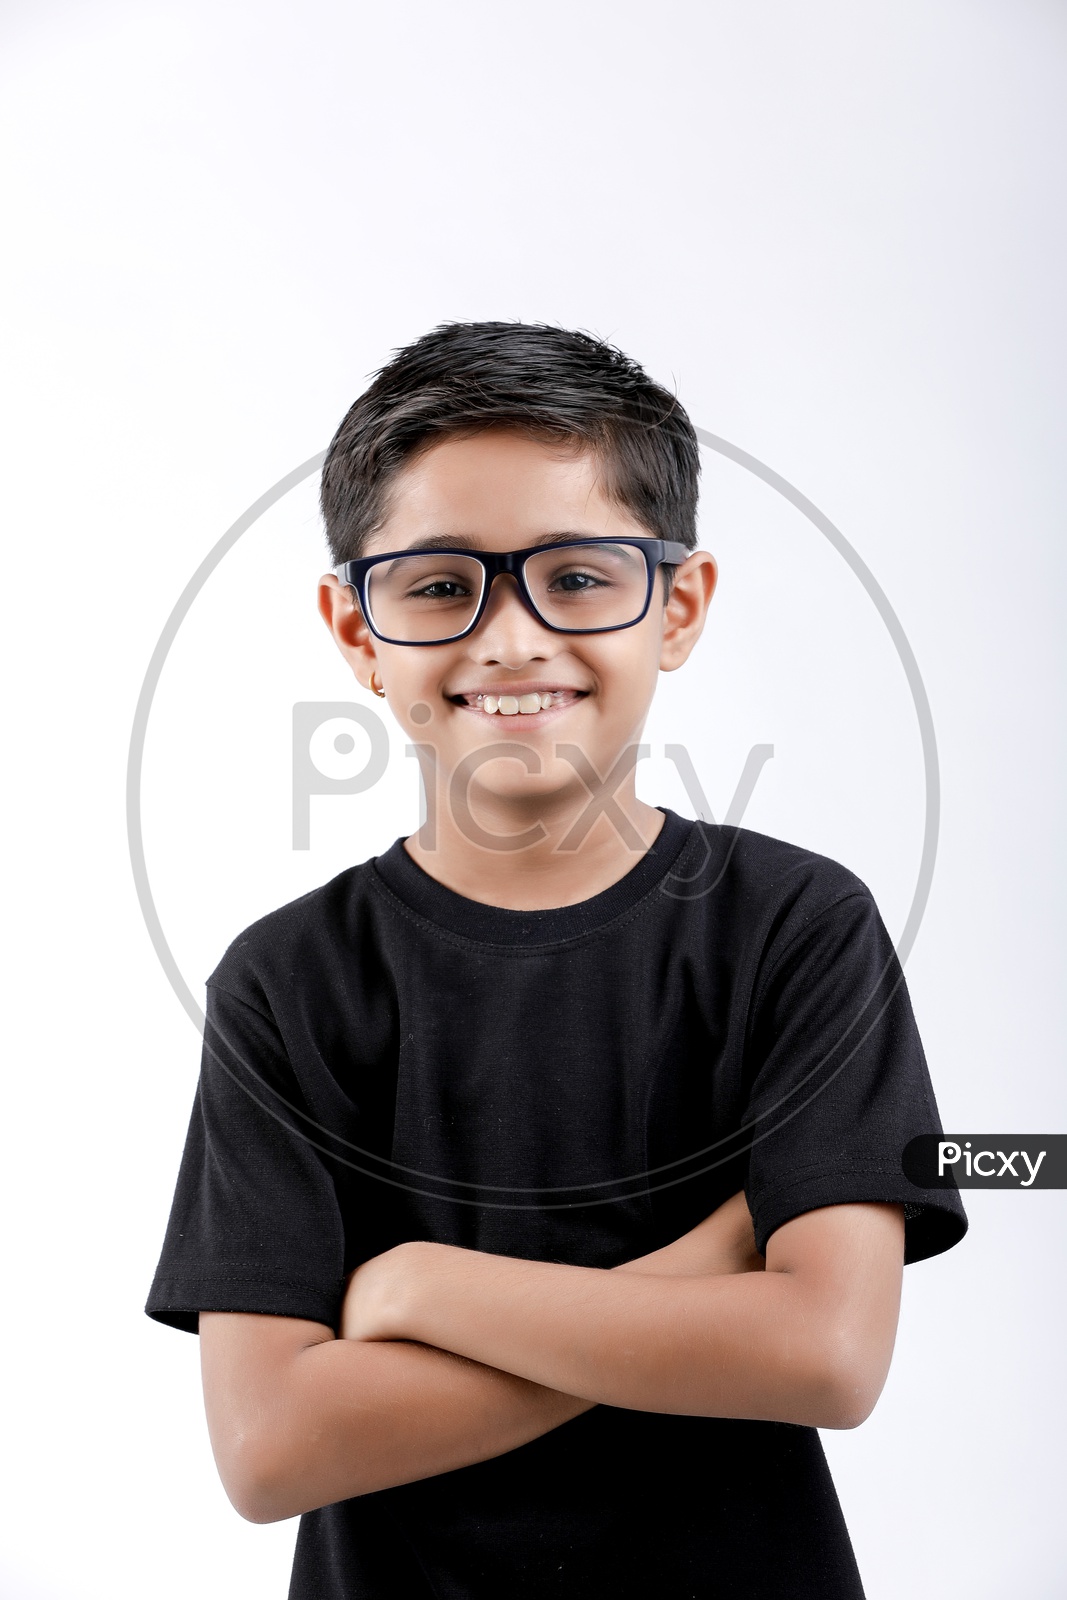 Indian or Asian Boy or Kid O r Child  With Multiple Expressions and Posing over an Isolated White Background